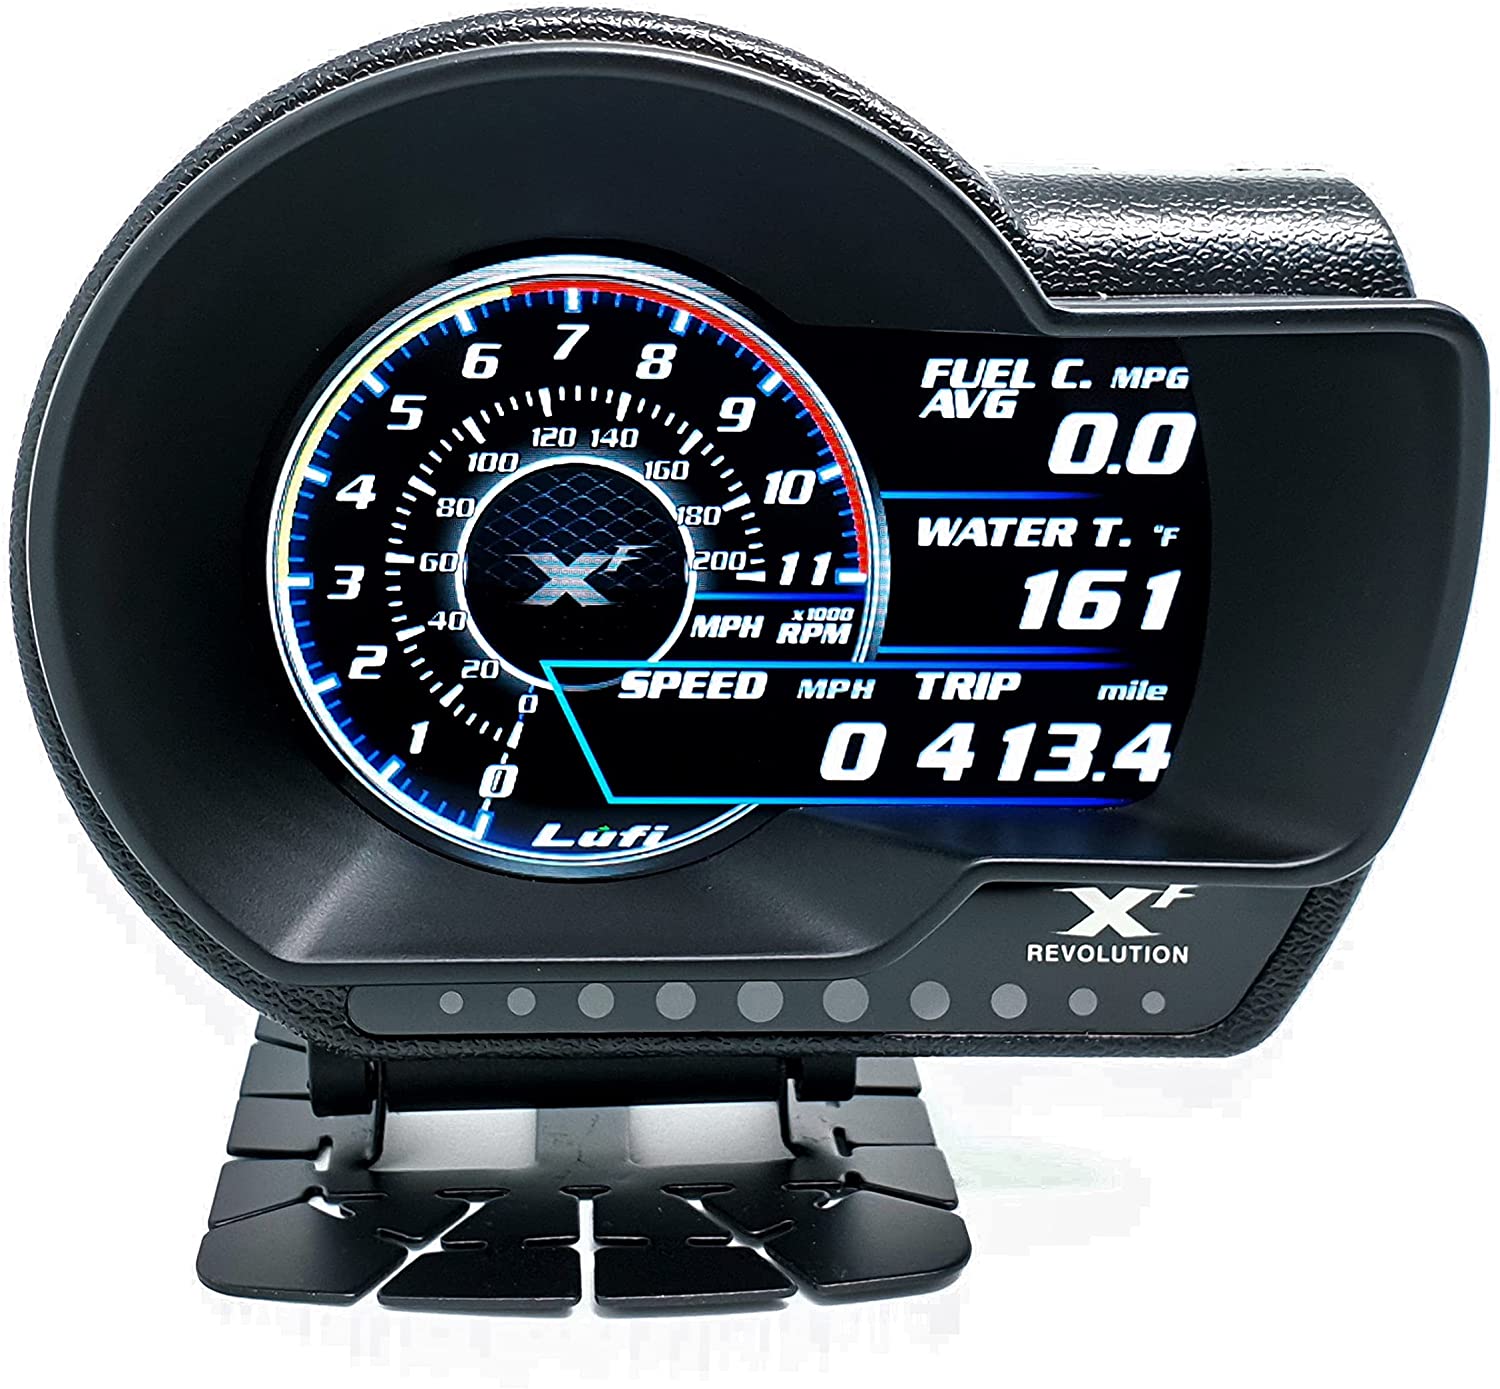 Lufi, Lufi XF Revolution OBD2 Gauge Display, Multi-Data Monitor, Head Up Display, Highly Customizable, Accurate and Fast Response [for Most Cars 2007 and After]